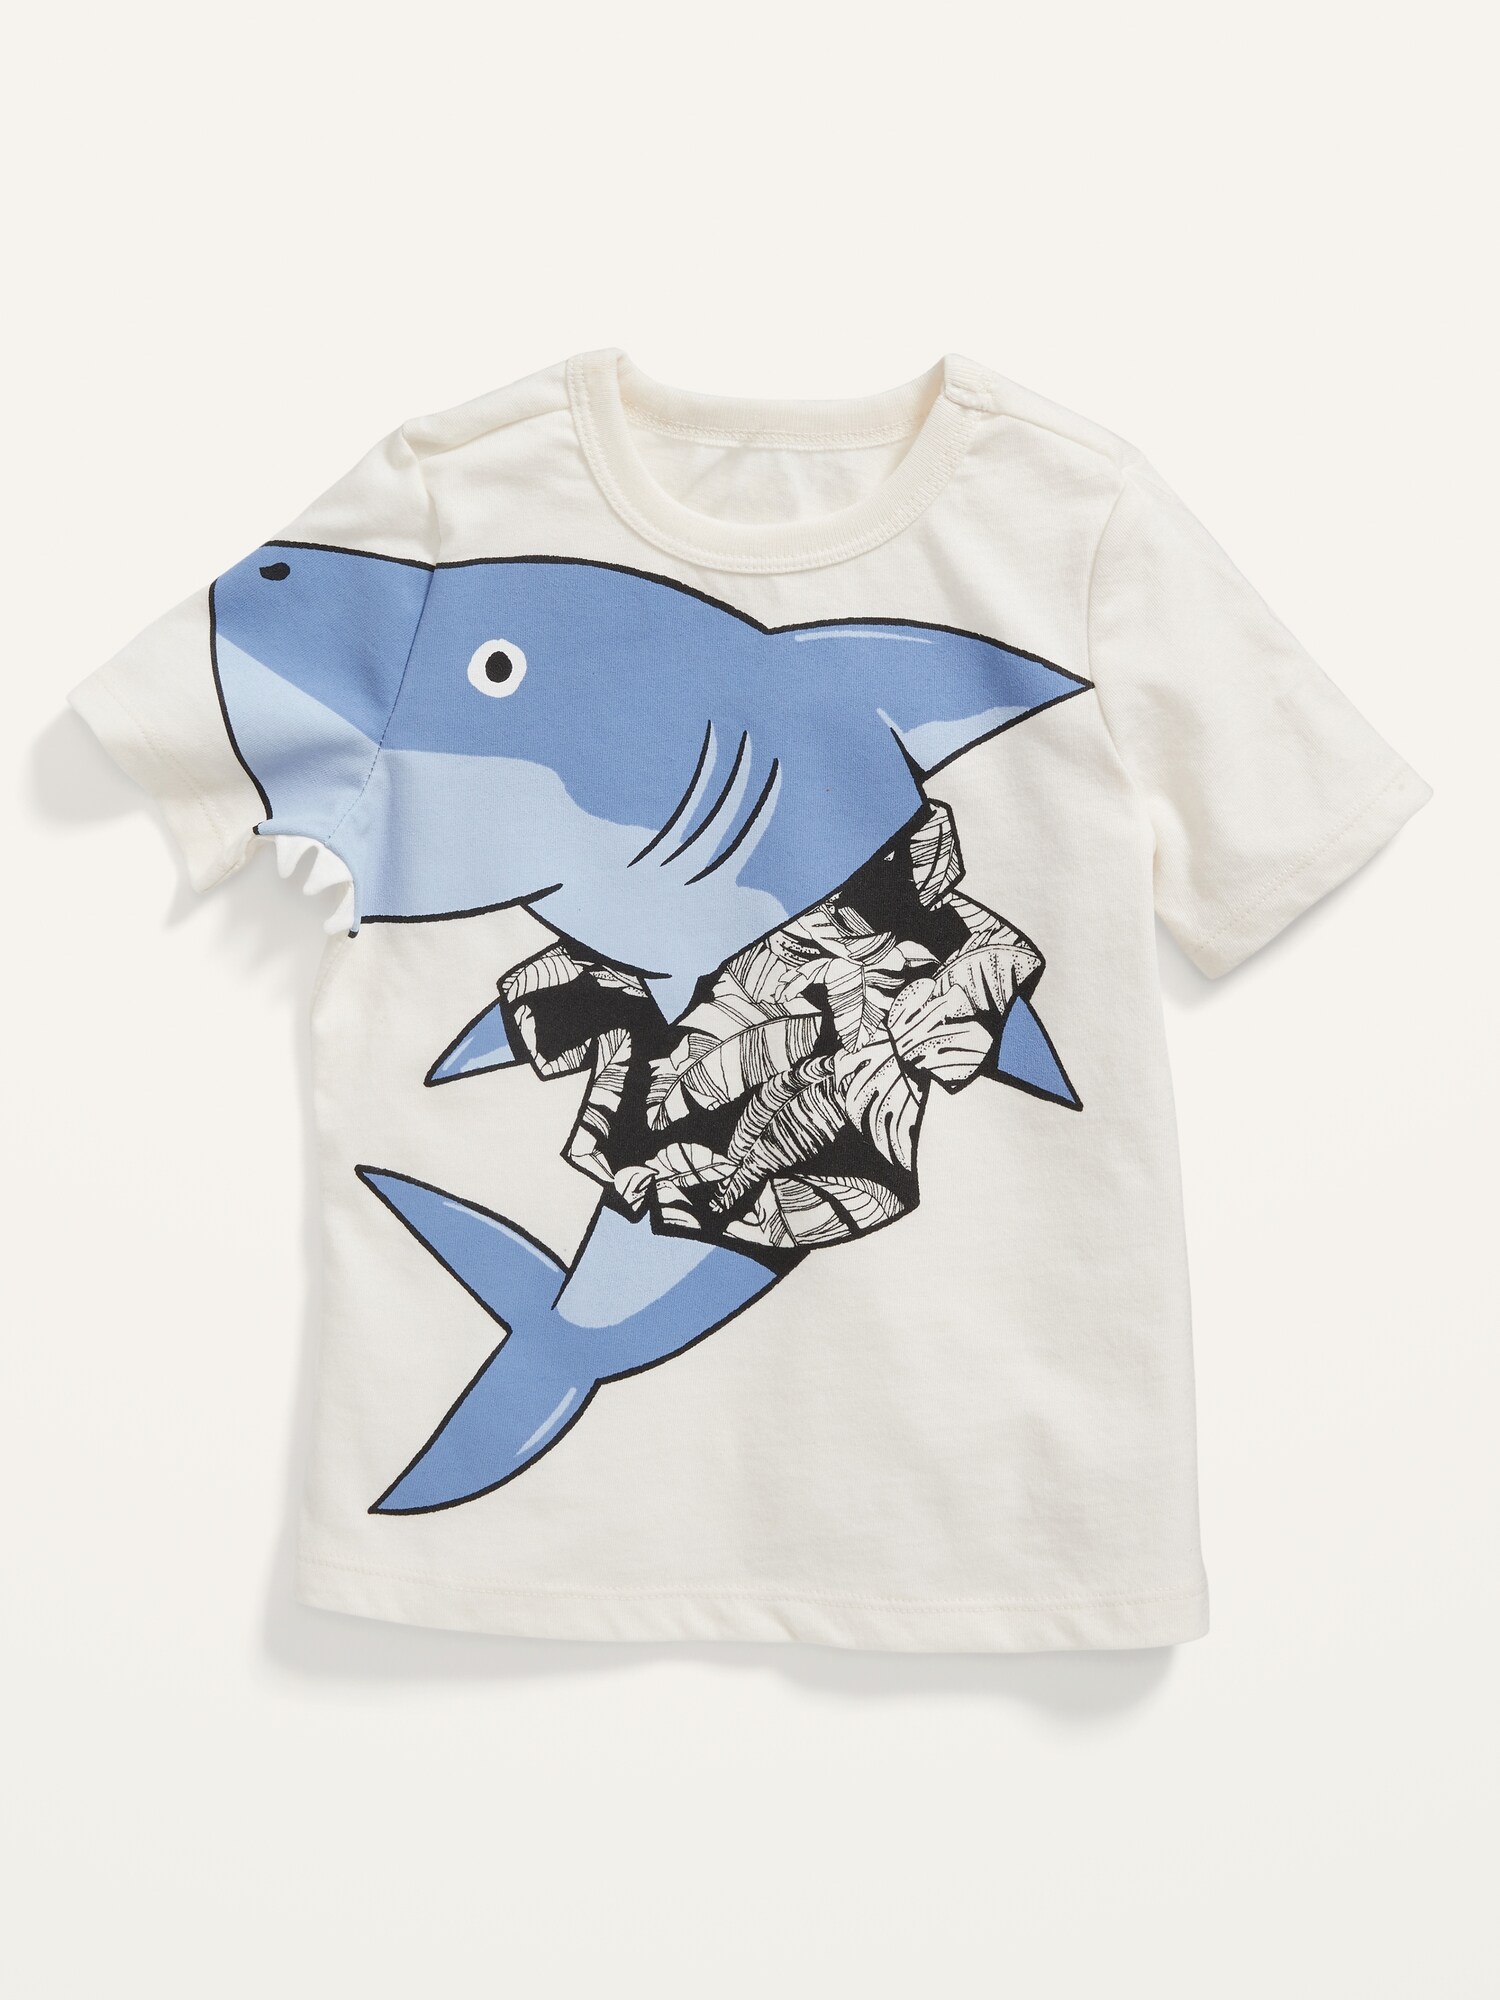 Short-Sleeve Graphic Tee for Toddler Boys